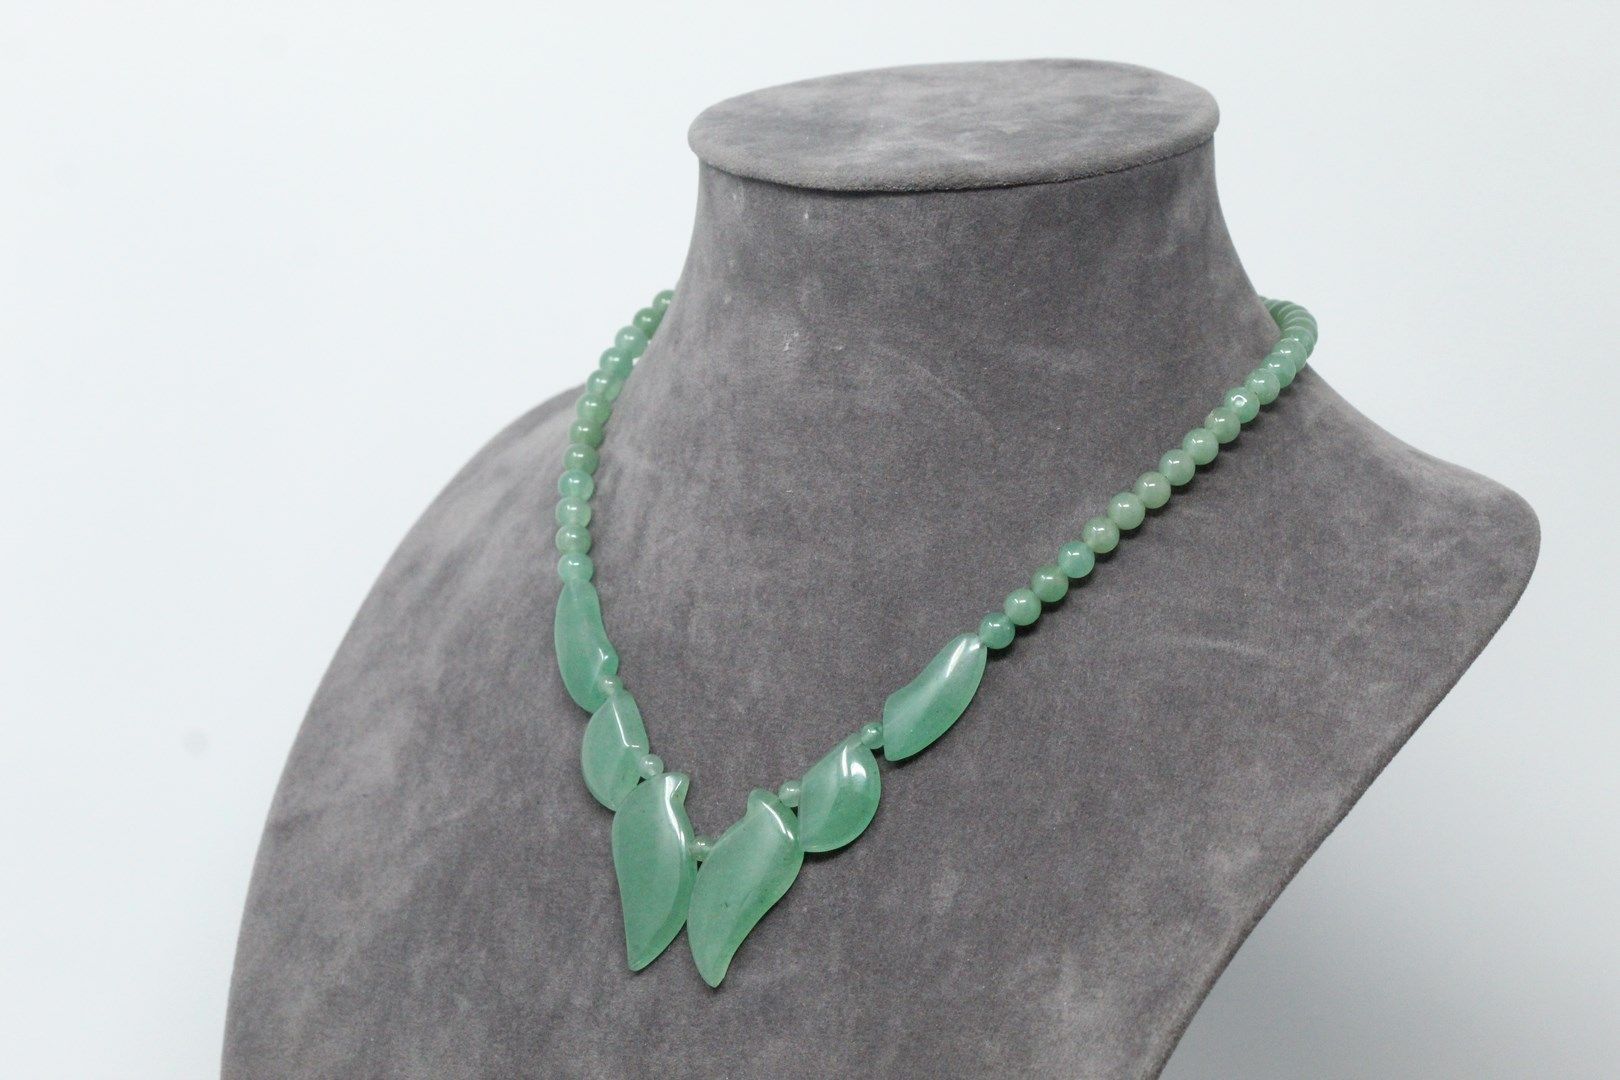 Null Necklace in jadeite, the base decorated with stylized leaves.

Necklace siz&hellip;